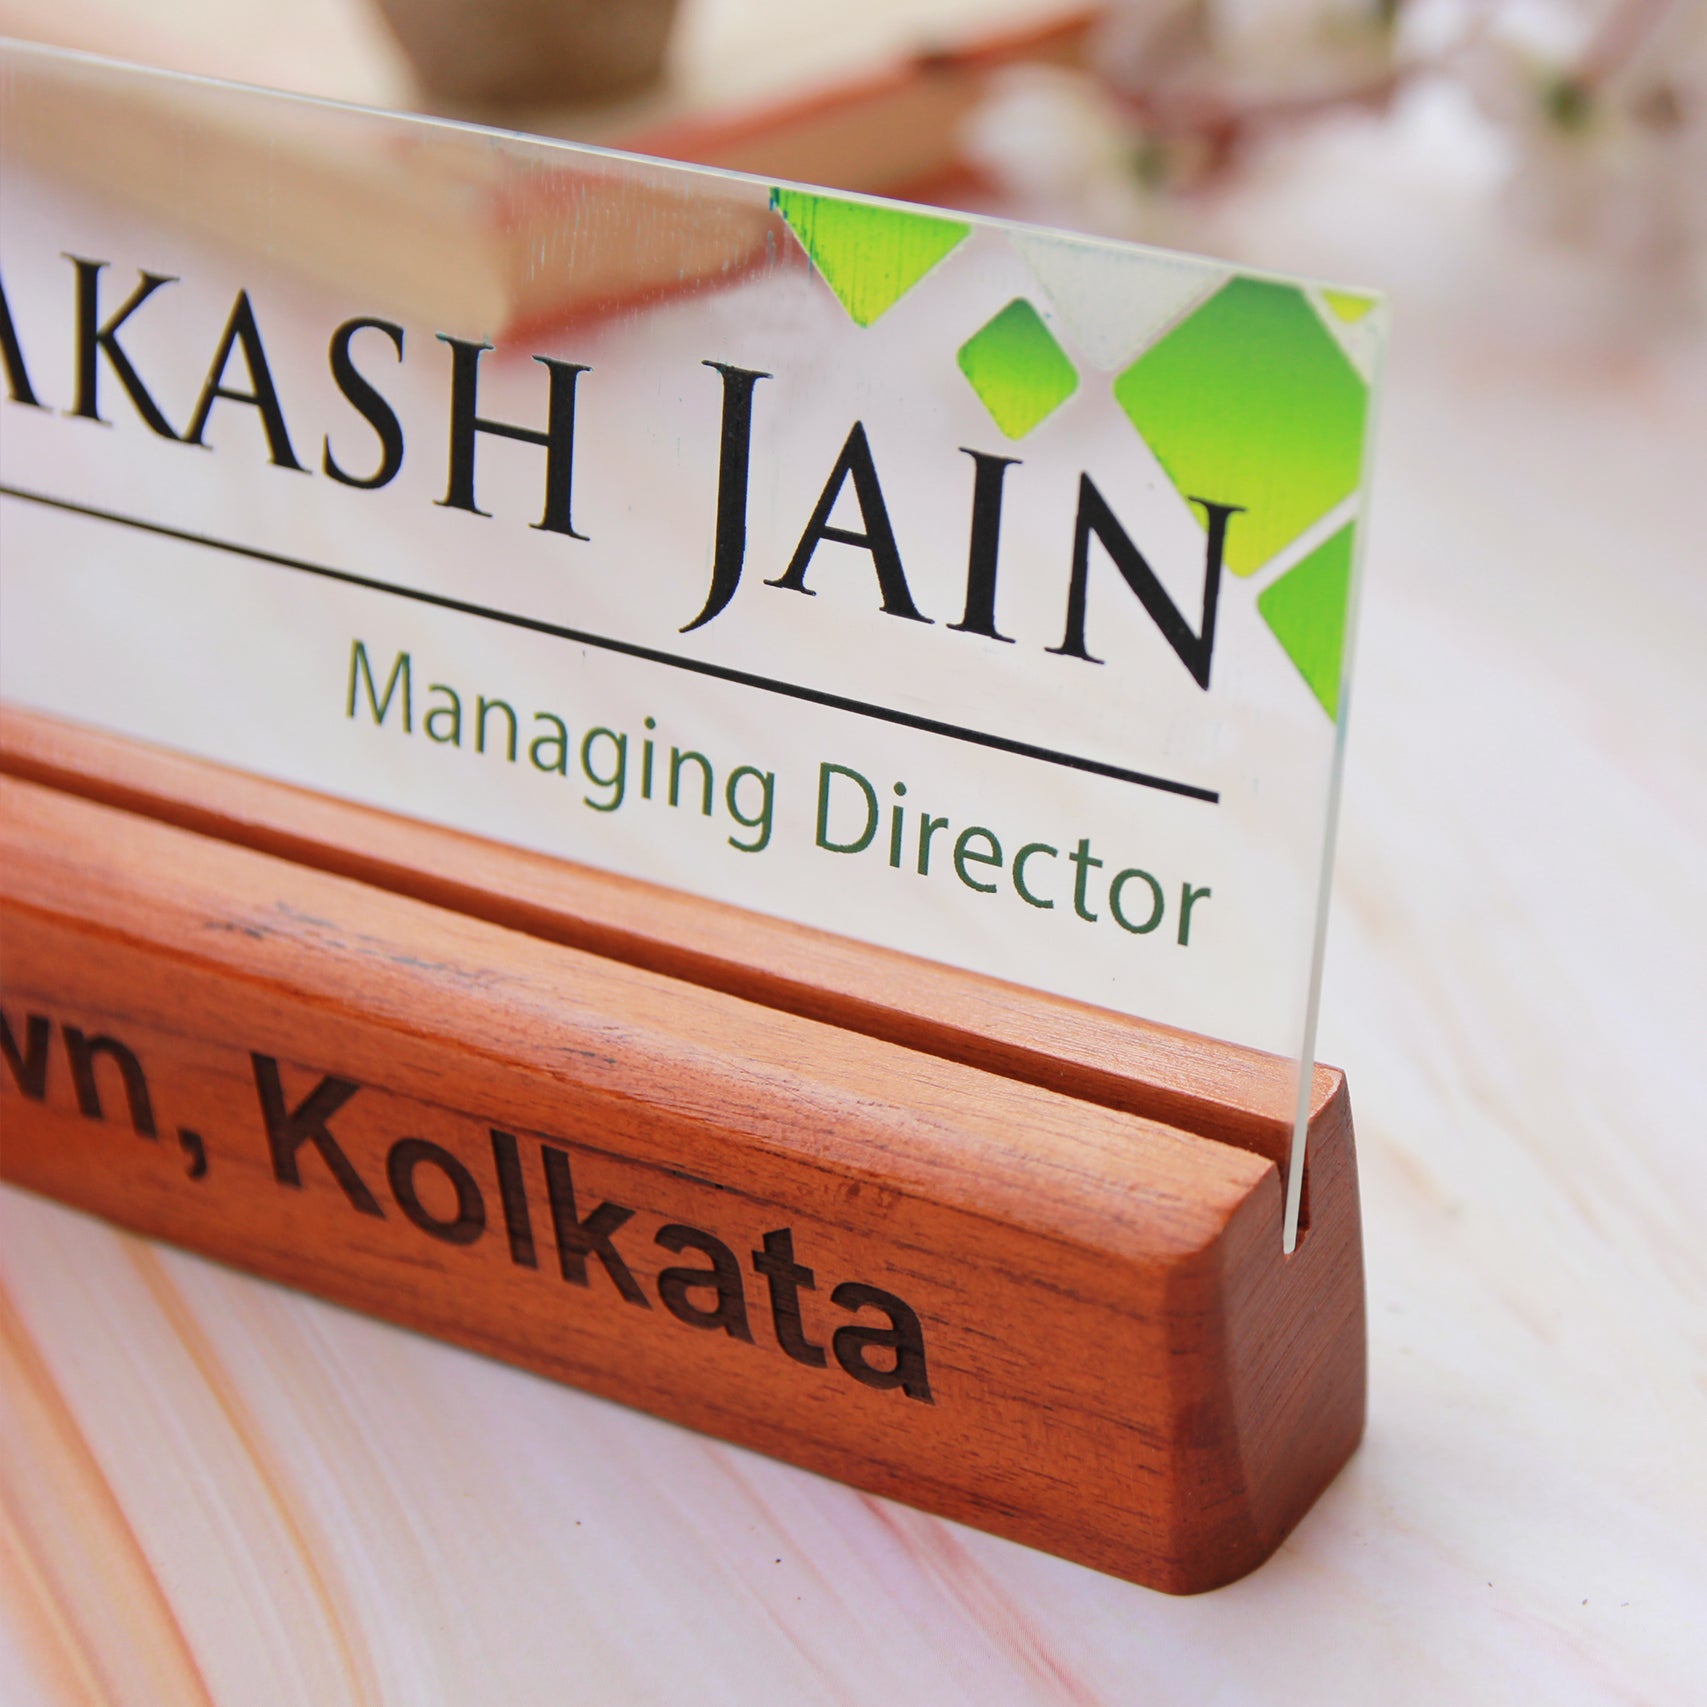 Wood Acrylic Office Nameplate With Designation | Corporate Gifts